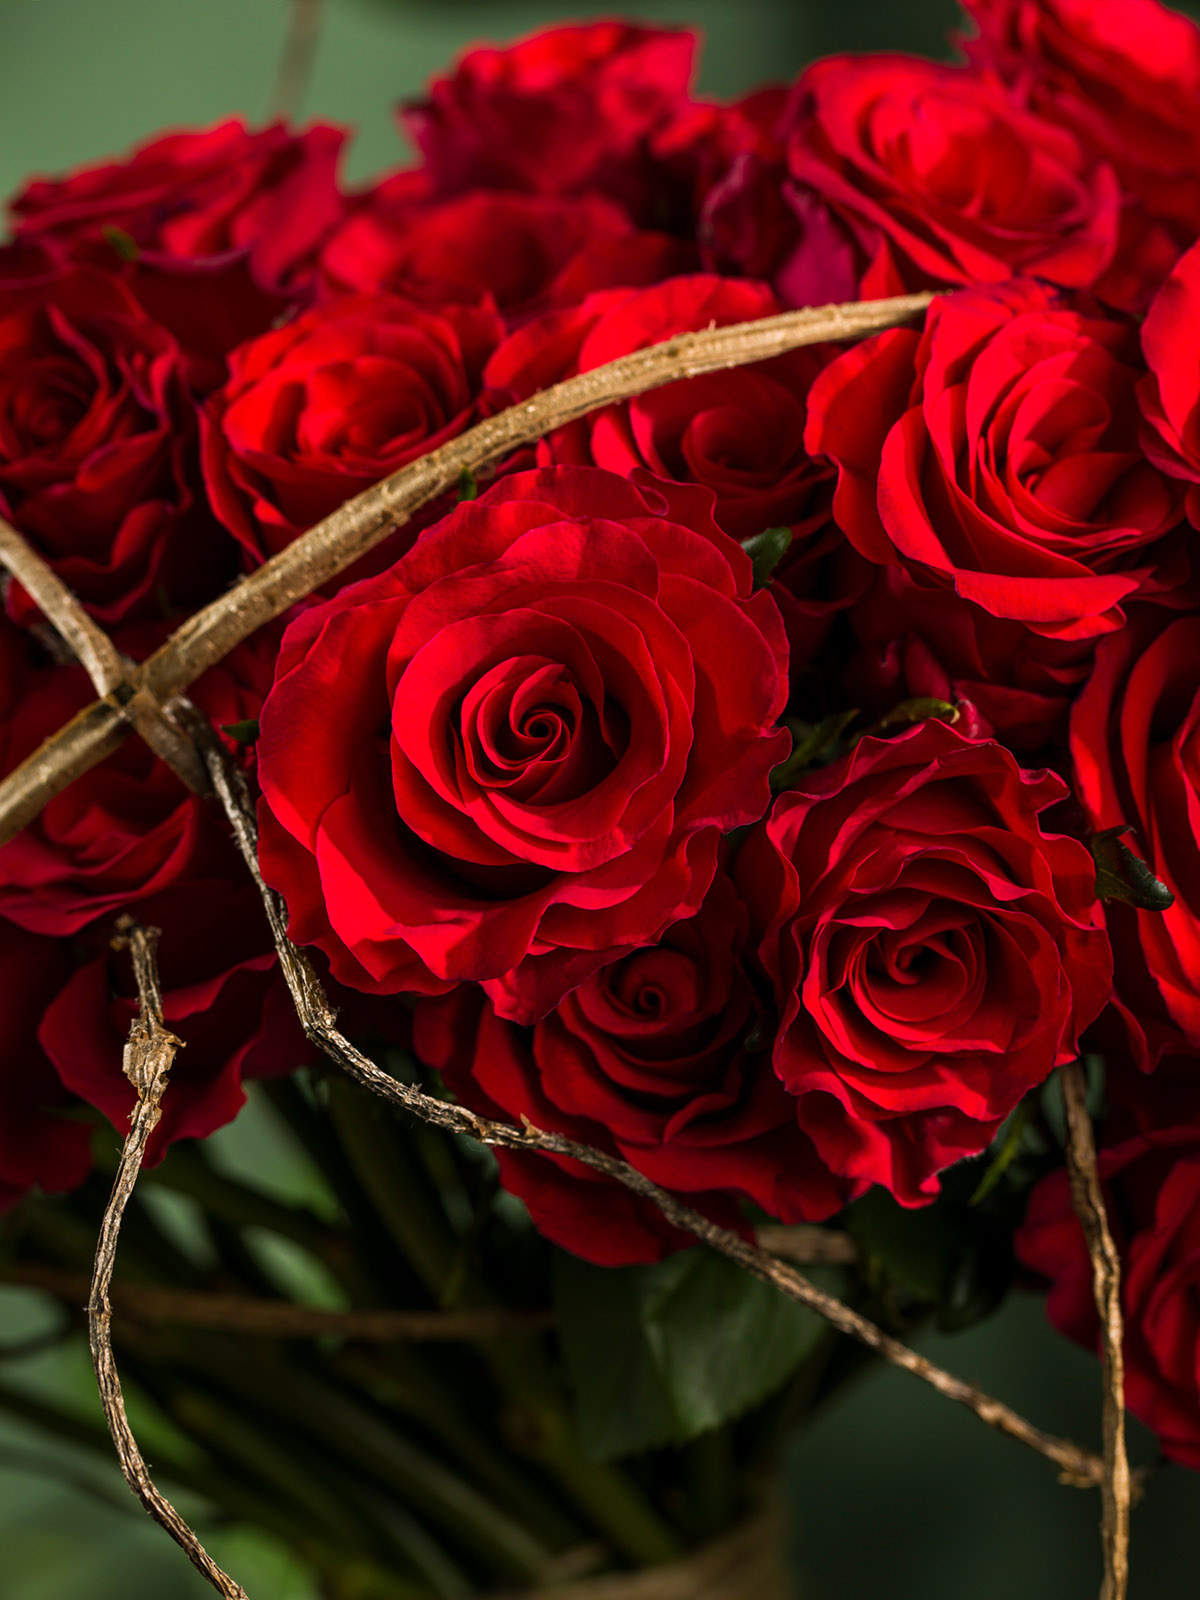 These Are the 10 Best Red Roses to Give on Valentine's Day - valentine's day on thursd - rose red tacazzi dummen orange zoomed in design